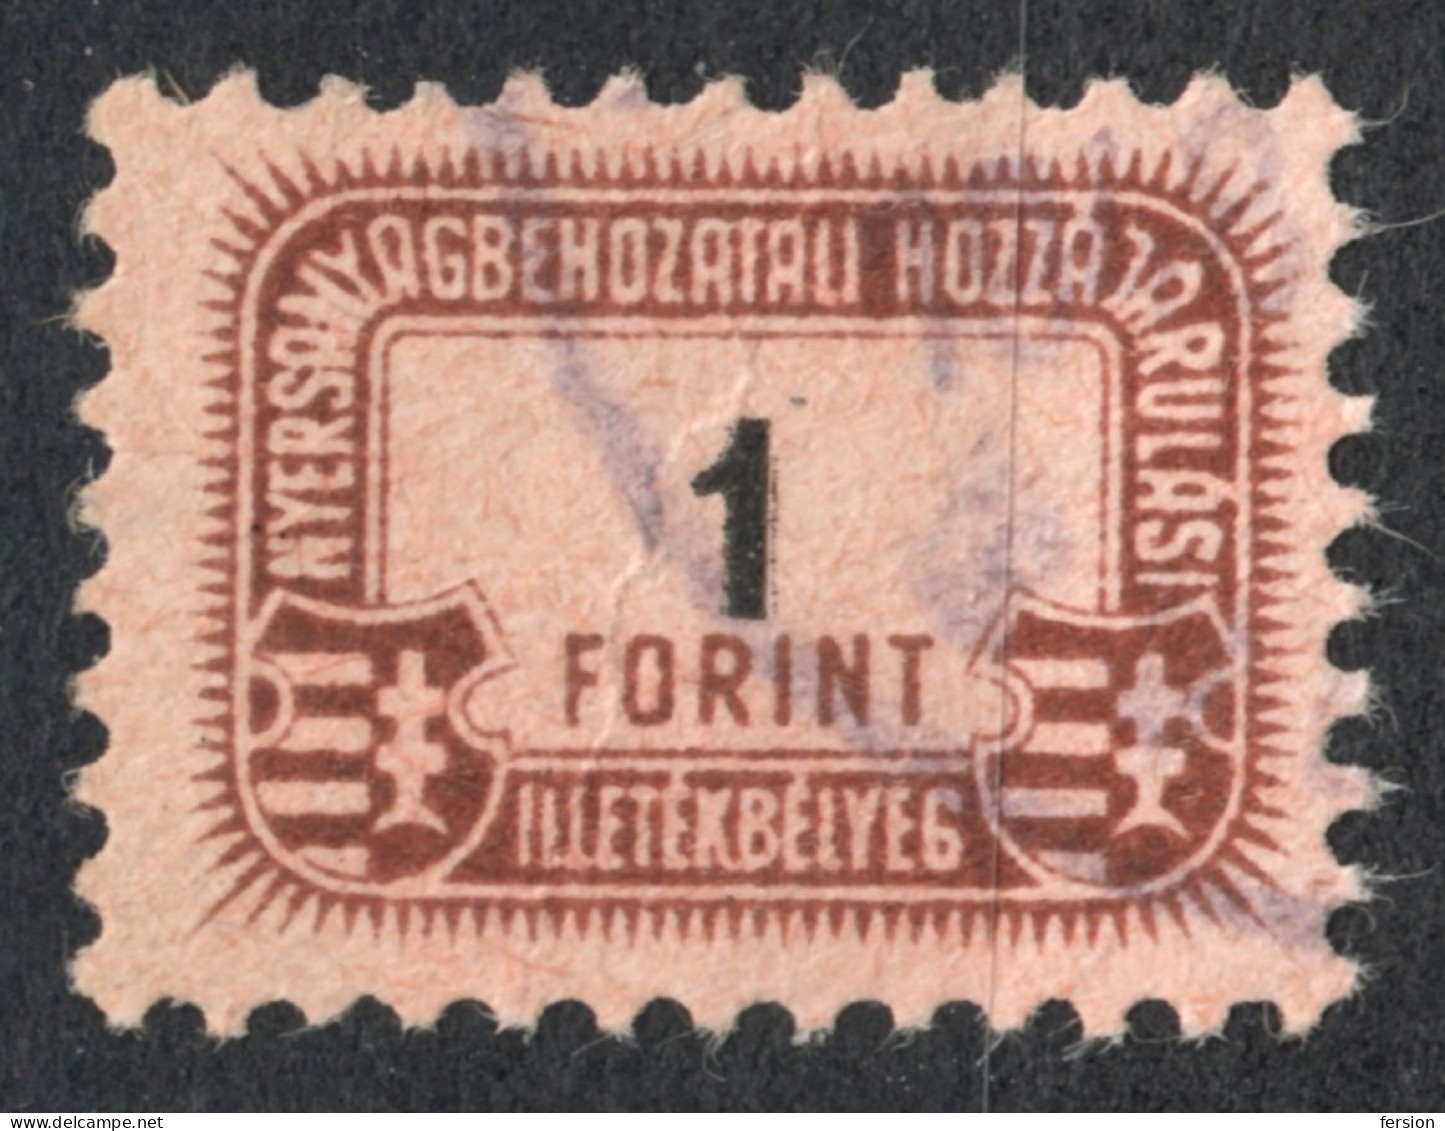 Hungary 1948 - Raw Material Import Revenue Fiscal INDUSTRY Tax Stamp - 1 Ft - Used - RRR! - Kossuth Coat Of Arms - Fiscaux